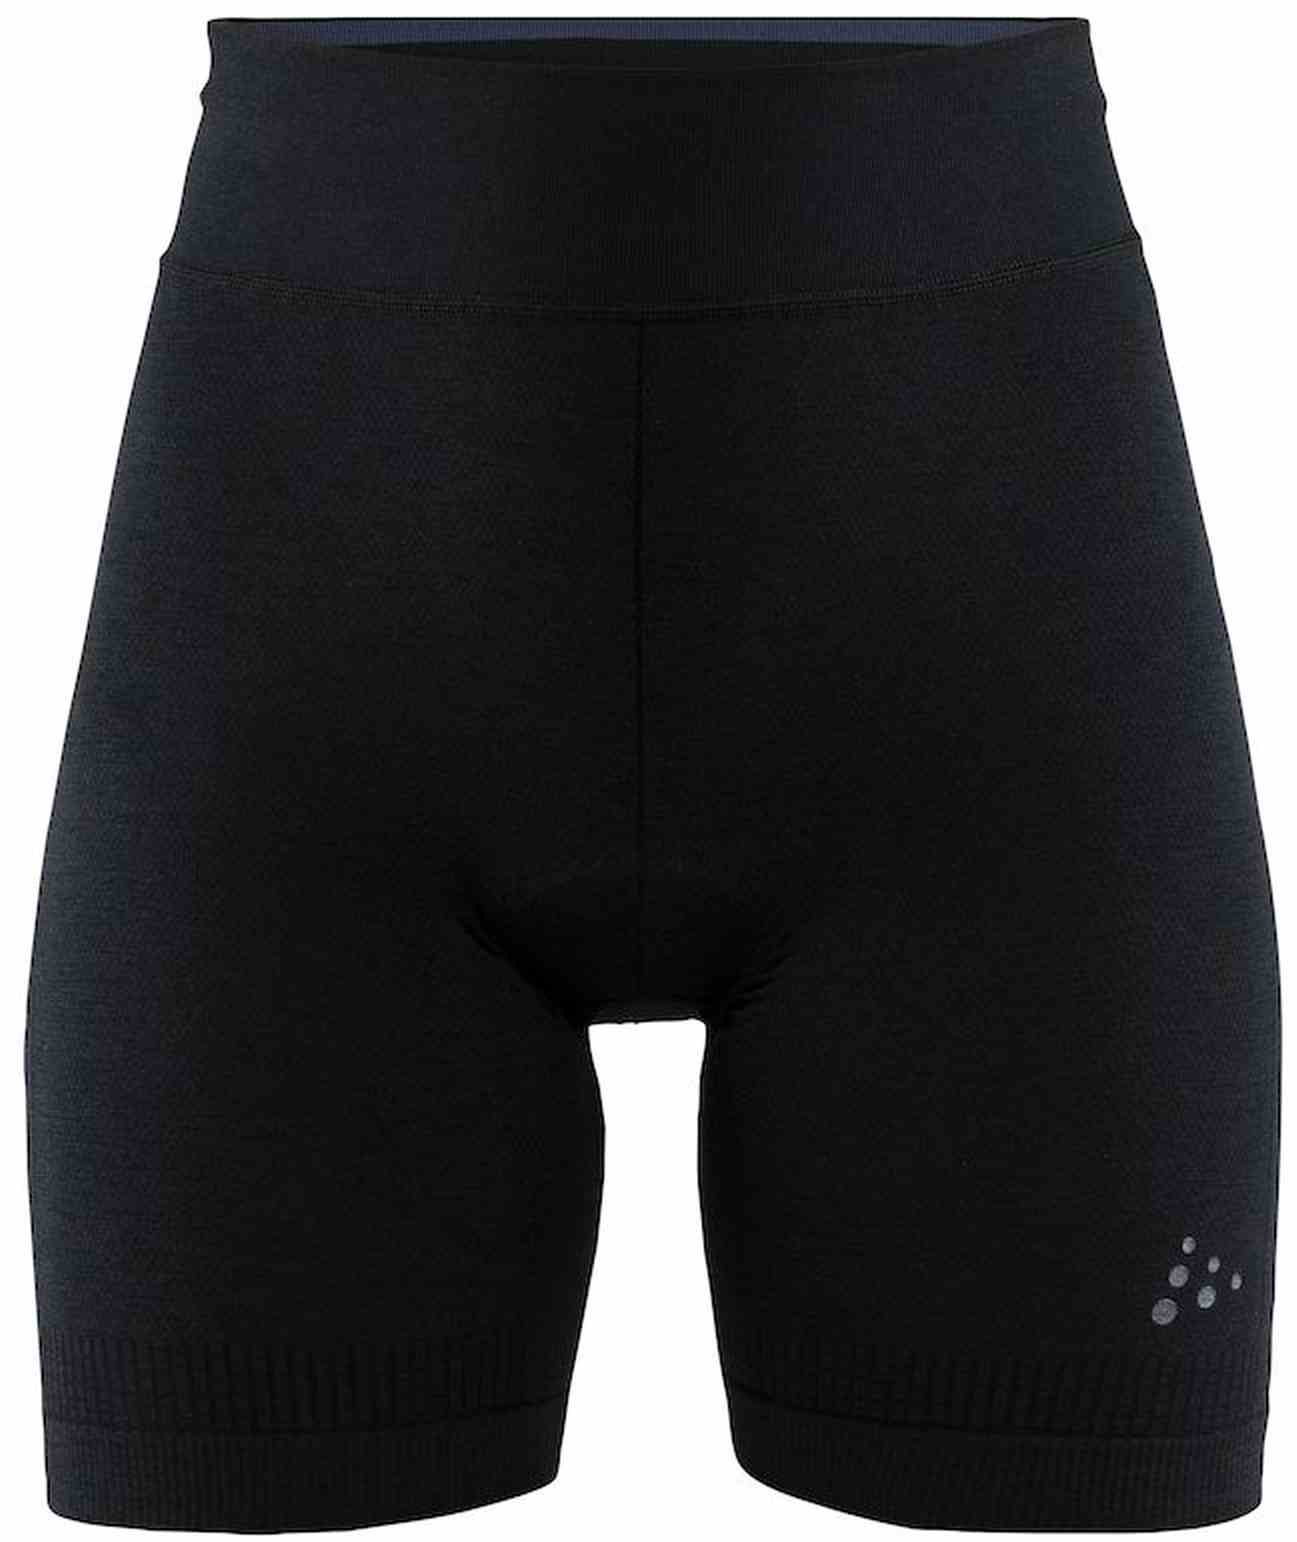 Women’s functional boxers with a cycling pad